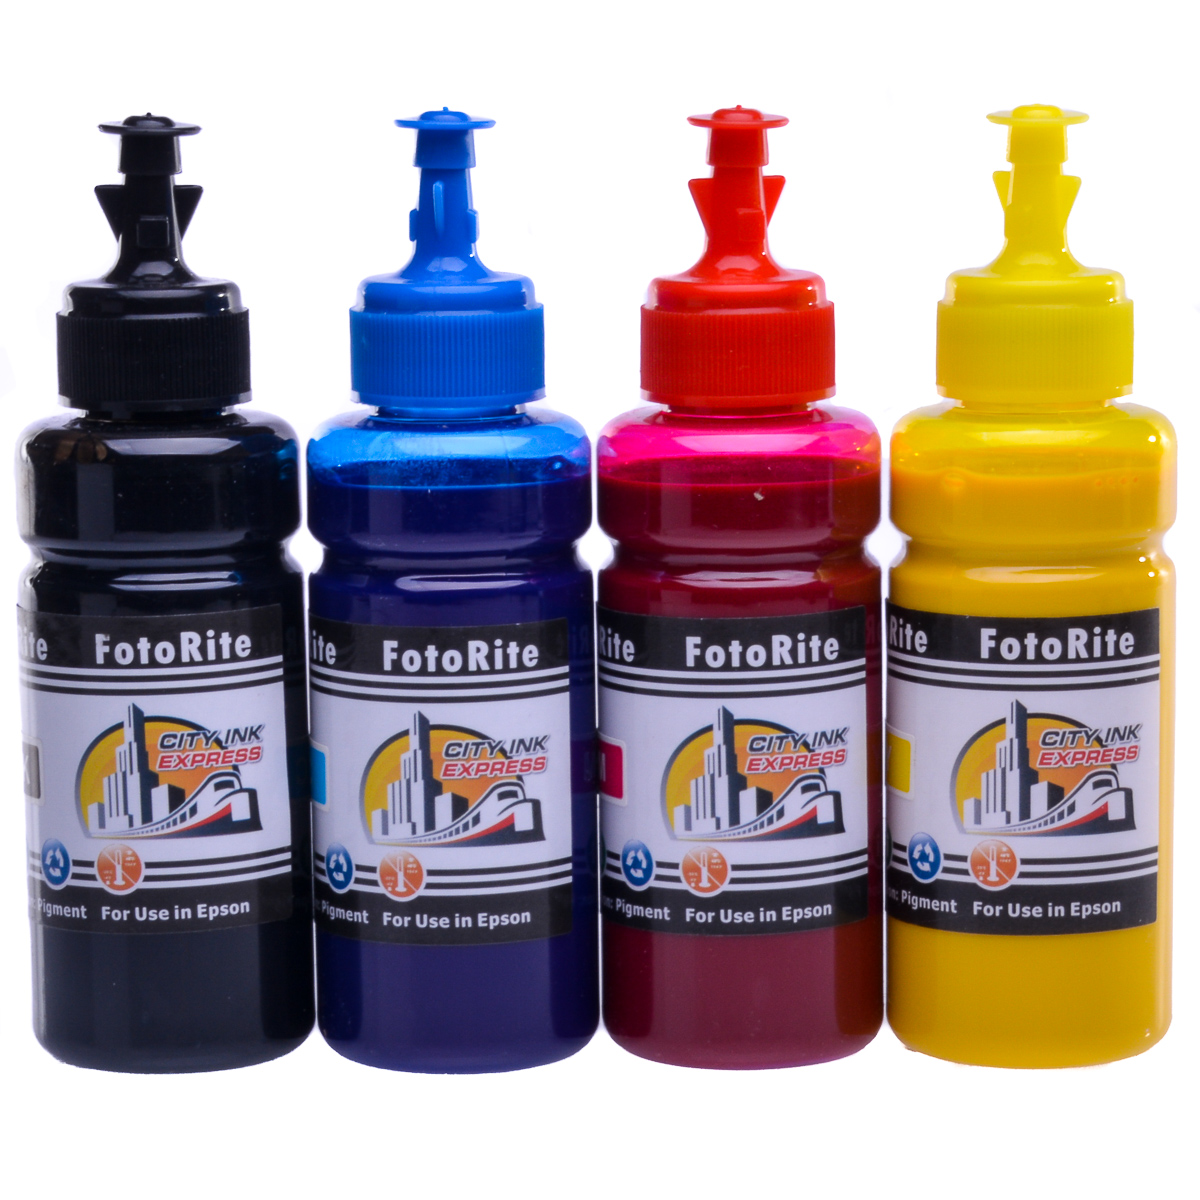 Cheap Multipack pigment ink refill replaces Epson XP-2105